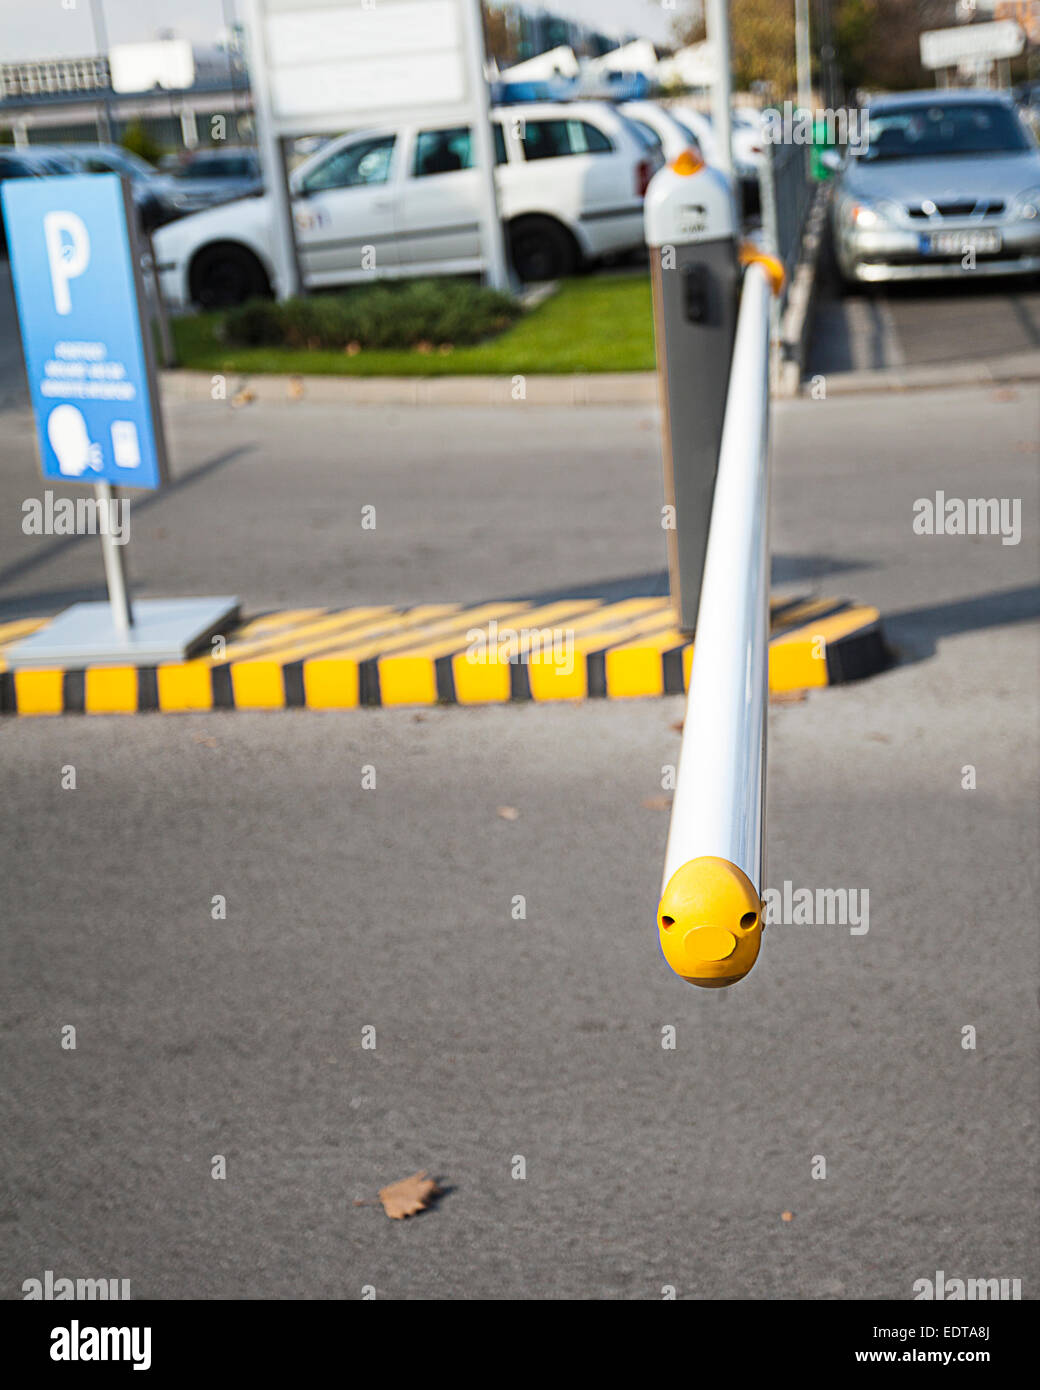 Parking barrier Stock Photo